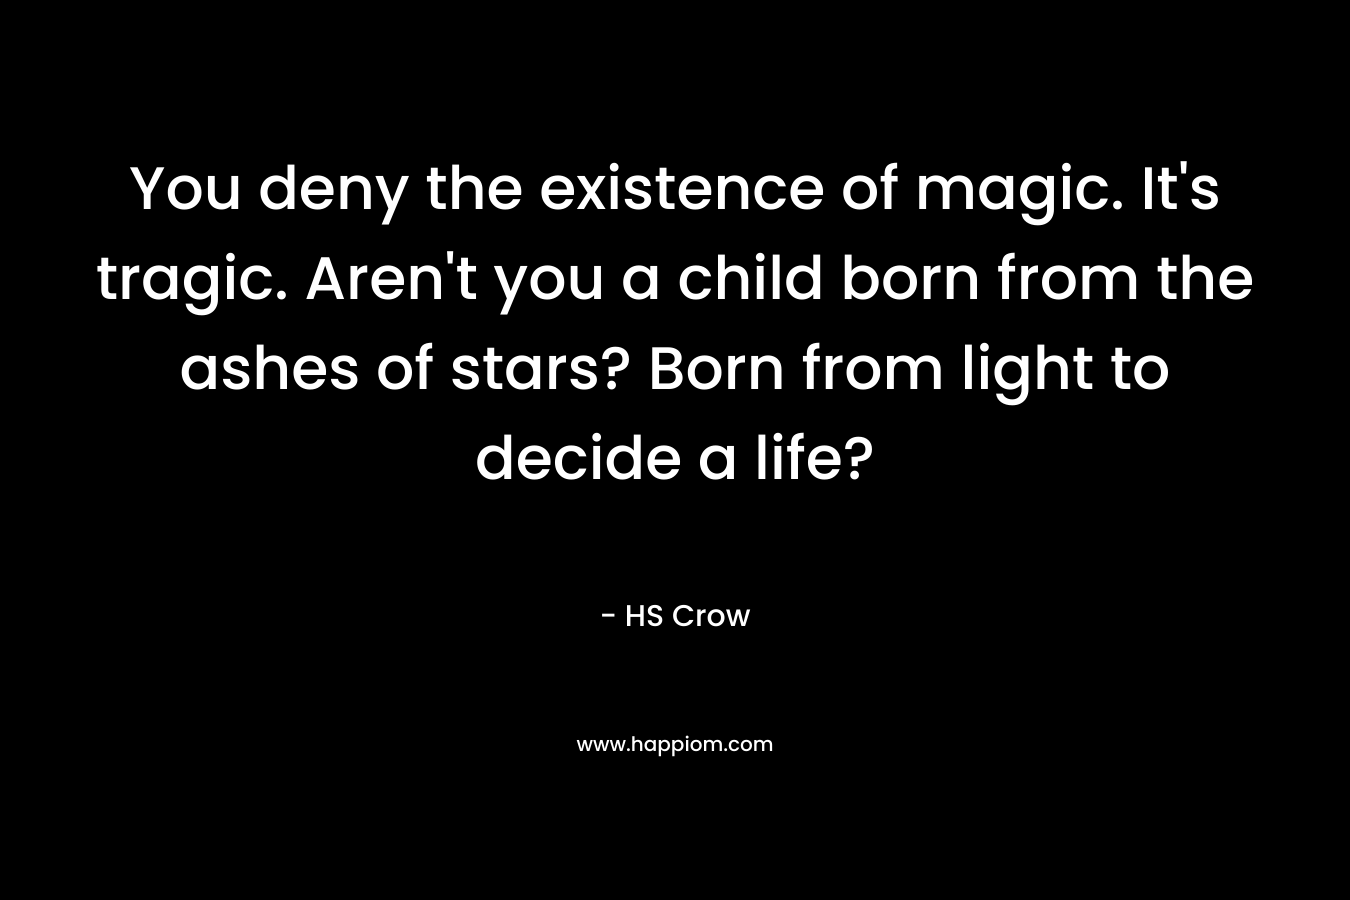 You deny the existence of magic. It's tragic. Aren't you a child born from the ashes of stars? Born from light to decide a life?